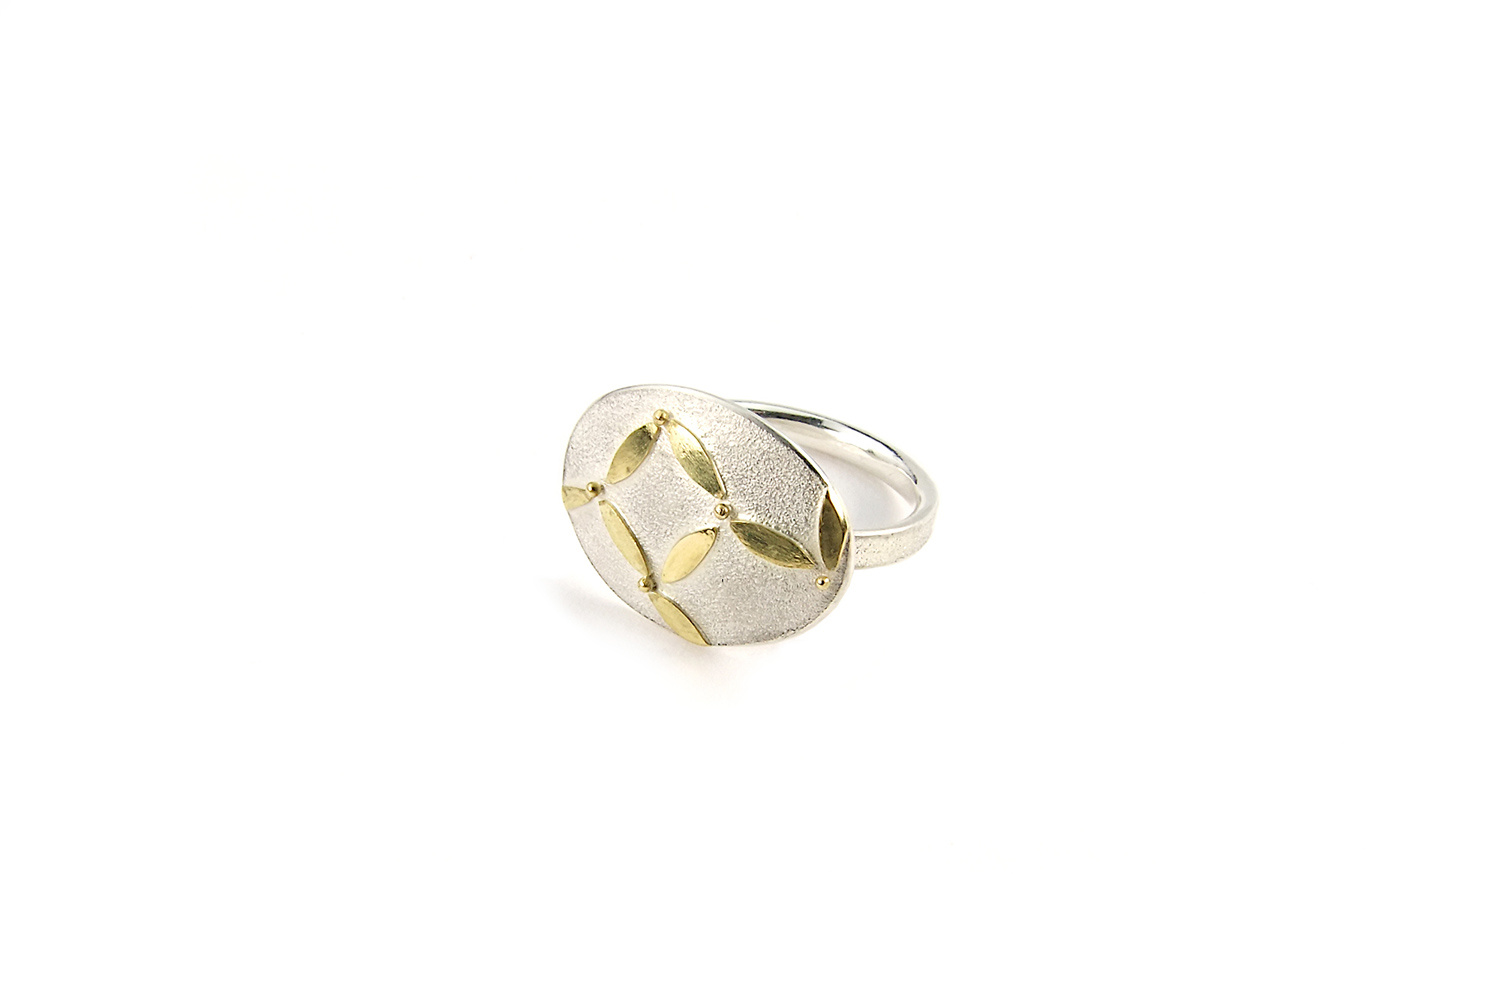 Ring with interrupted Gold Pattern by Hendrike Barz-Meltzer